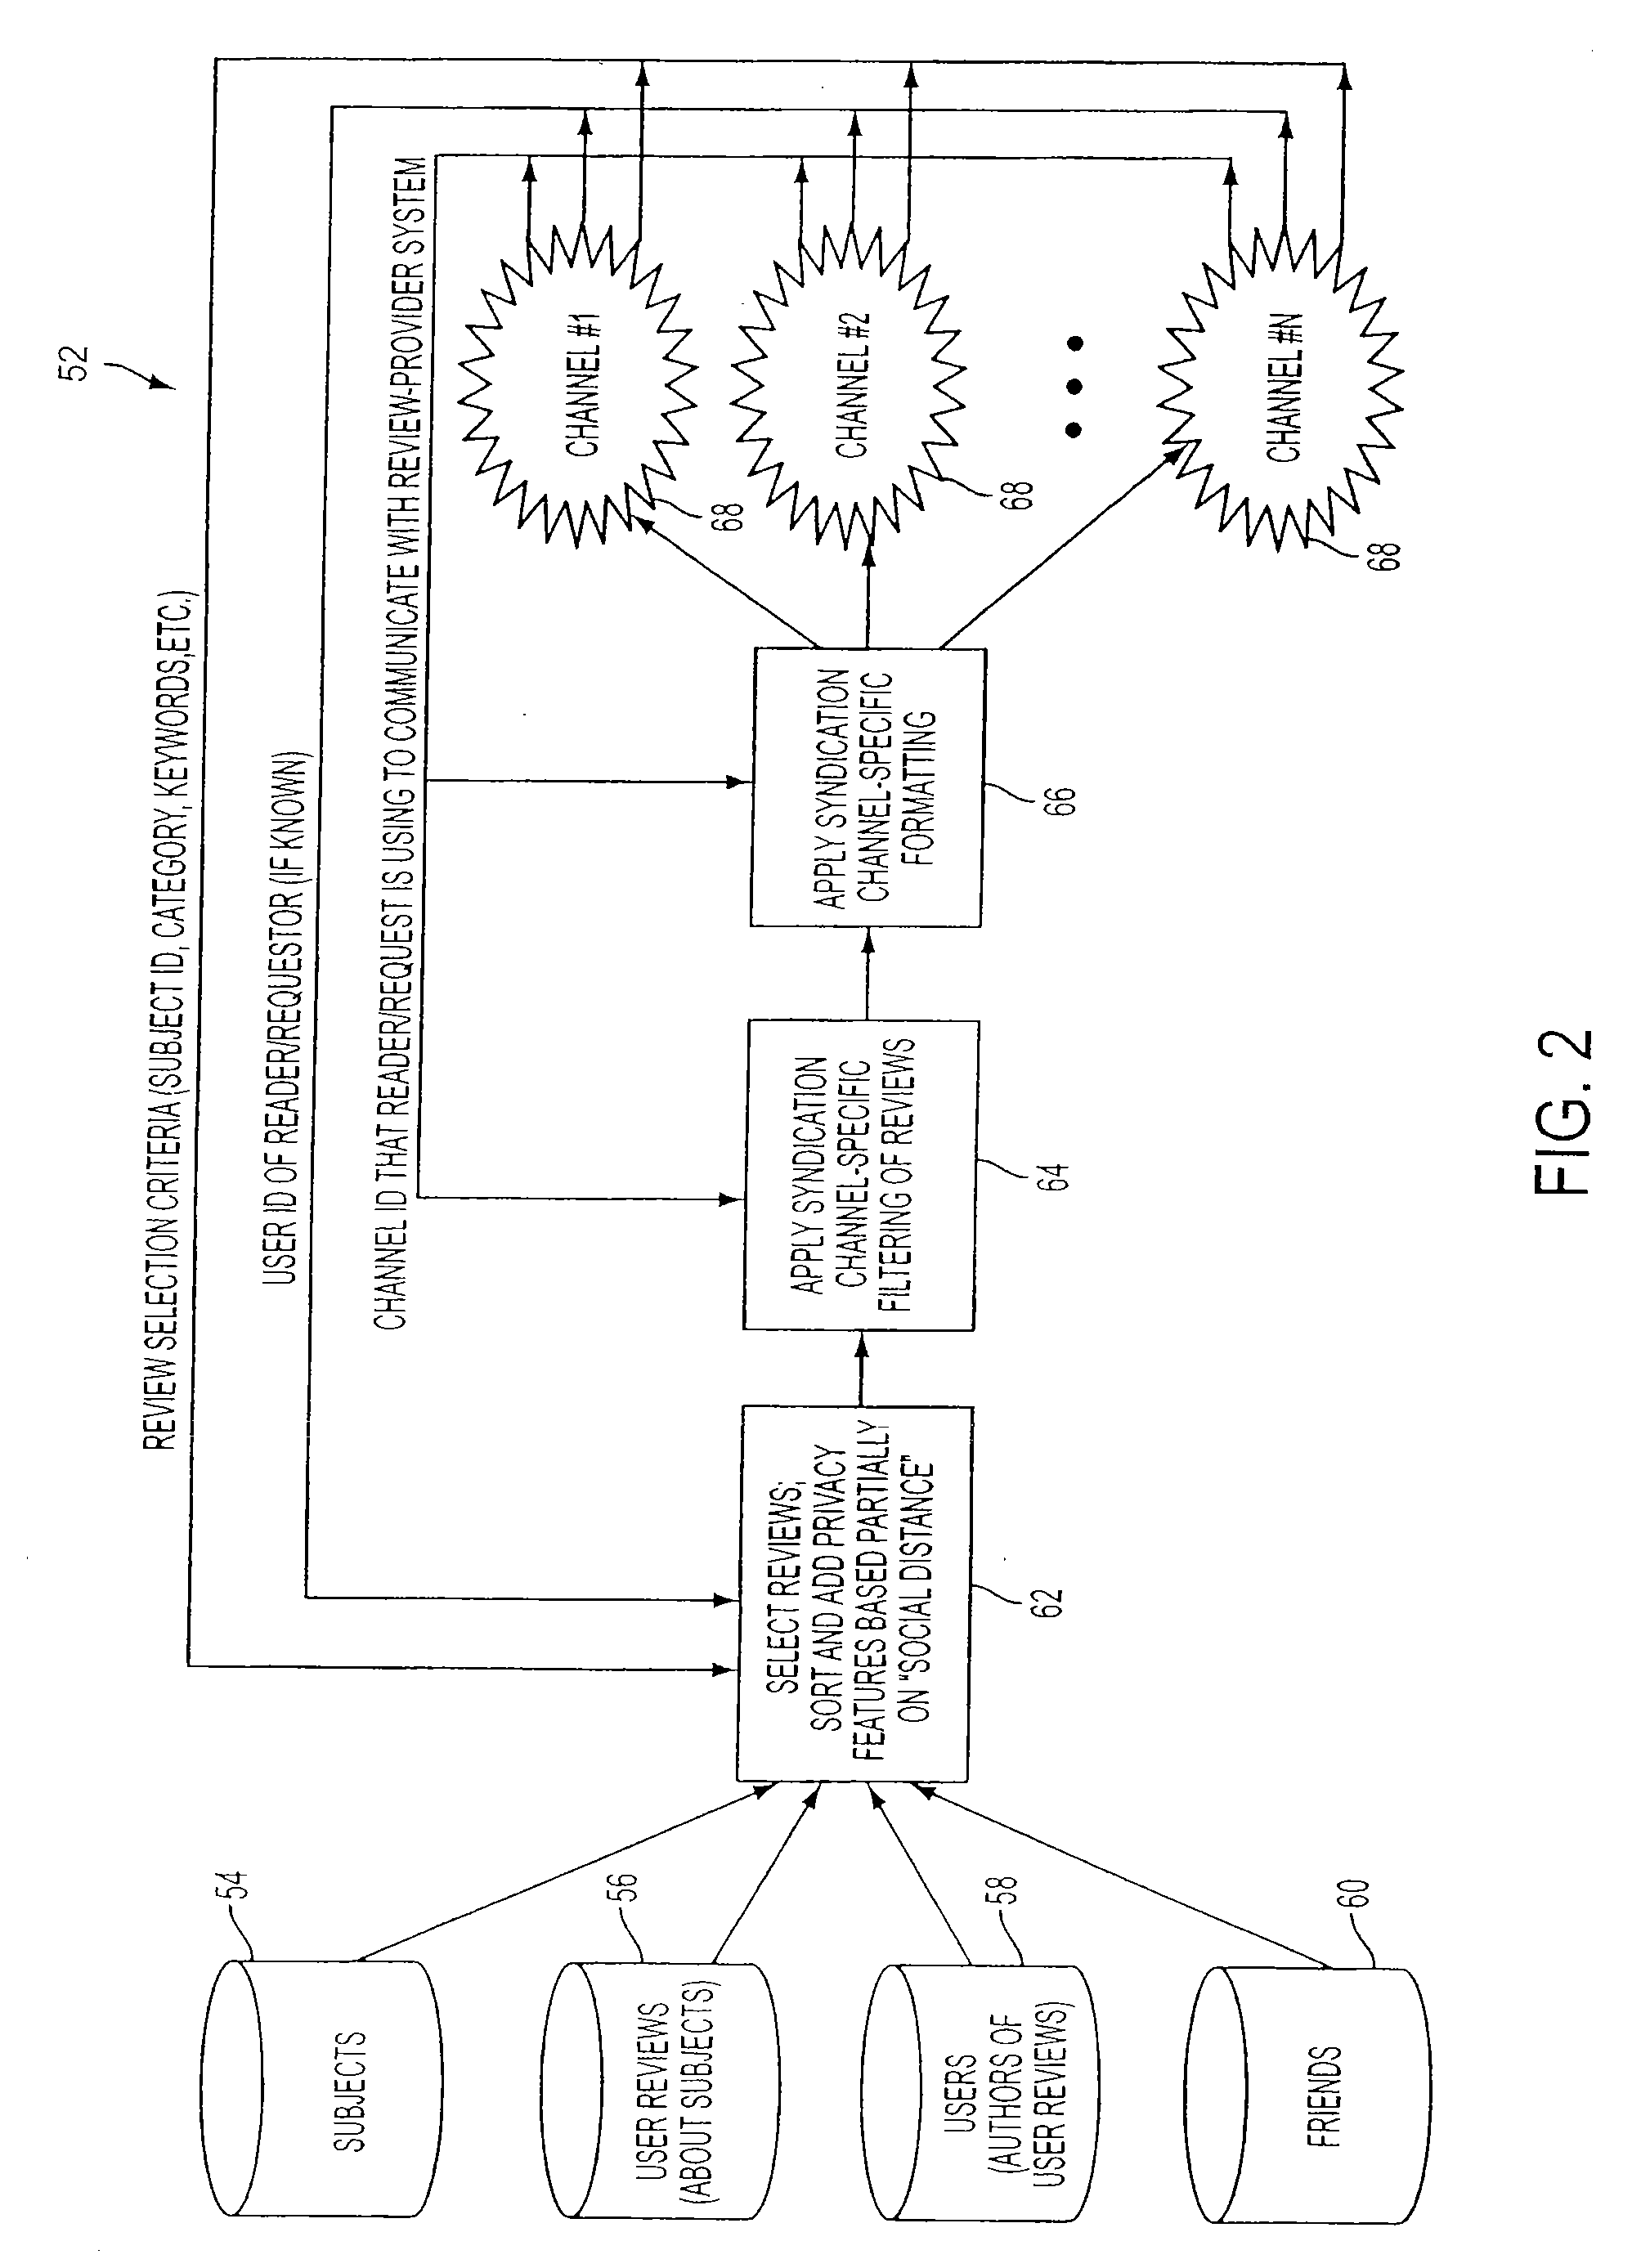 Social-Network Enabled Review System With Subject Identification Review Authoring Form Creation